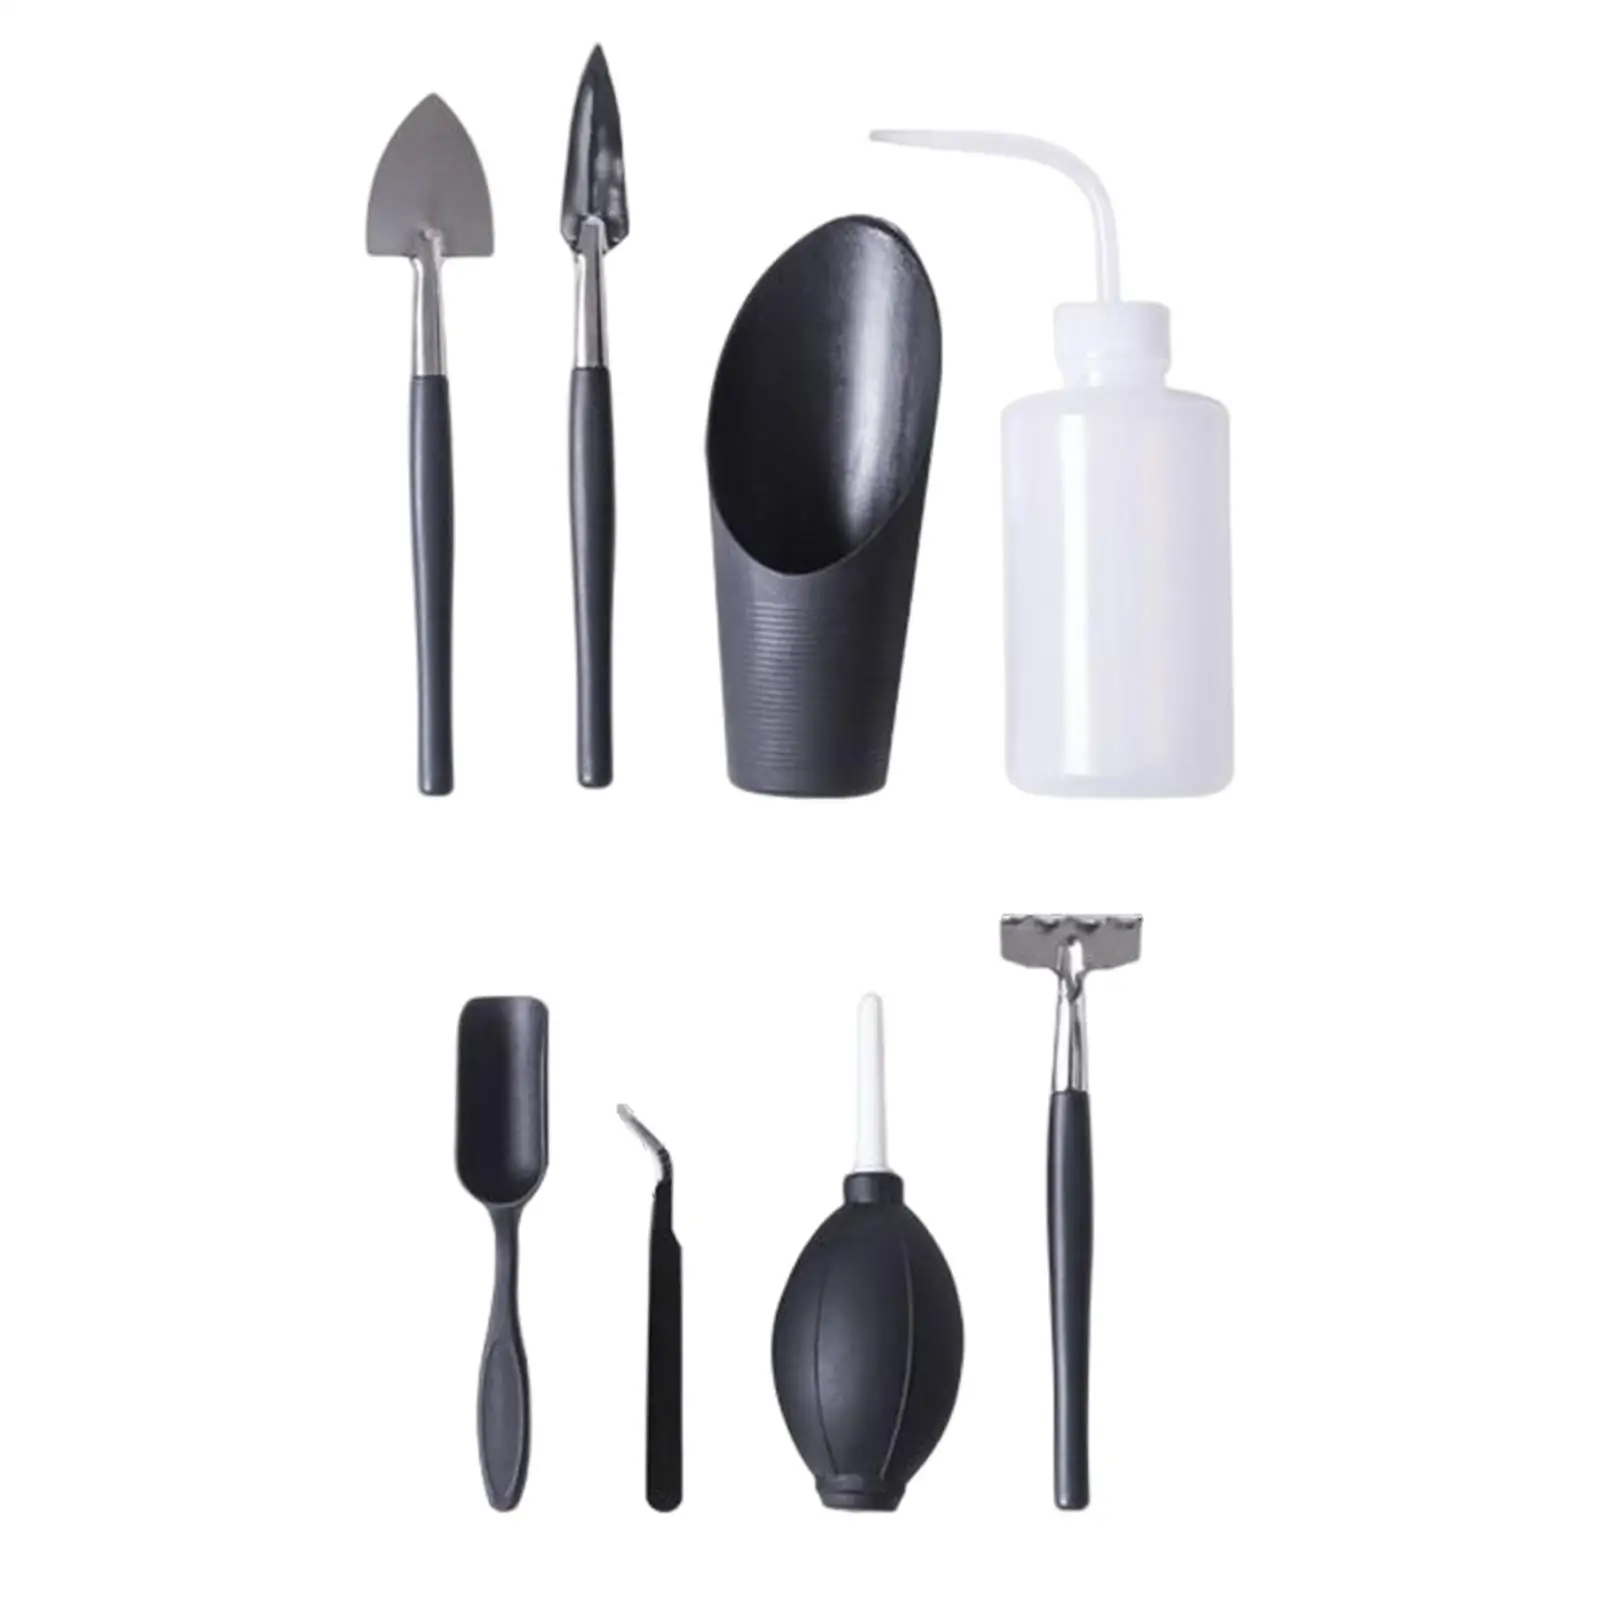  Garden Transplanting Tools 8 Pieces Easy to Wash Simple to Use Accessories  , PP Materials Durable Lightweight